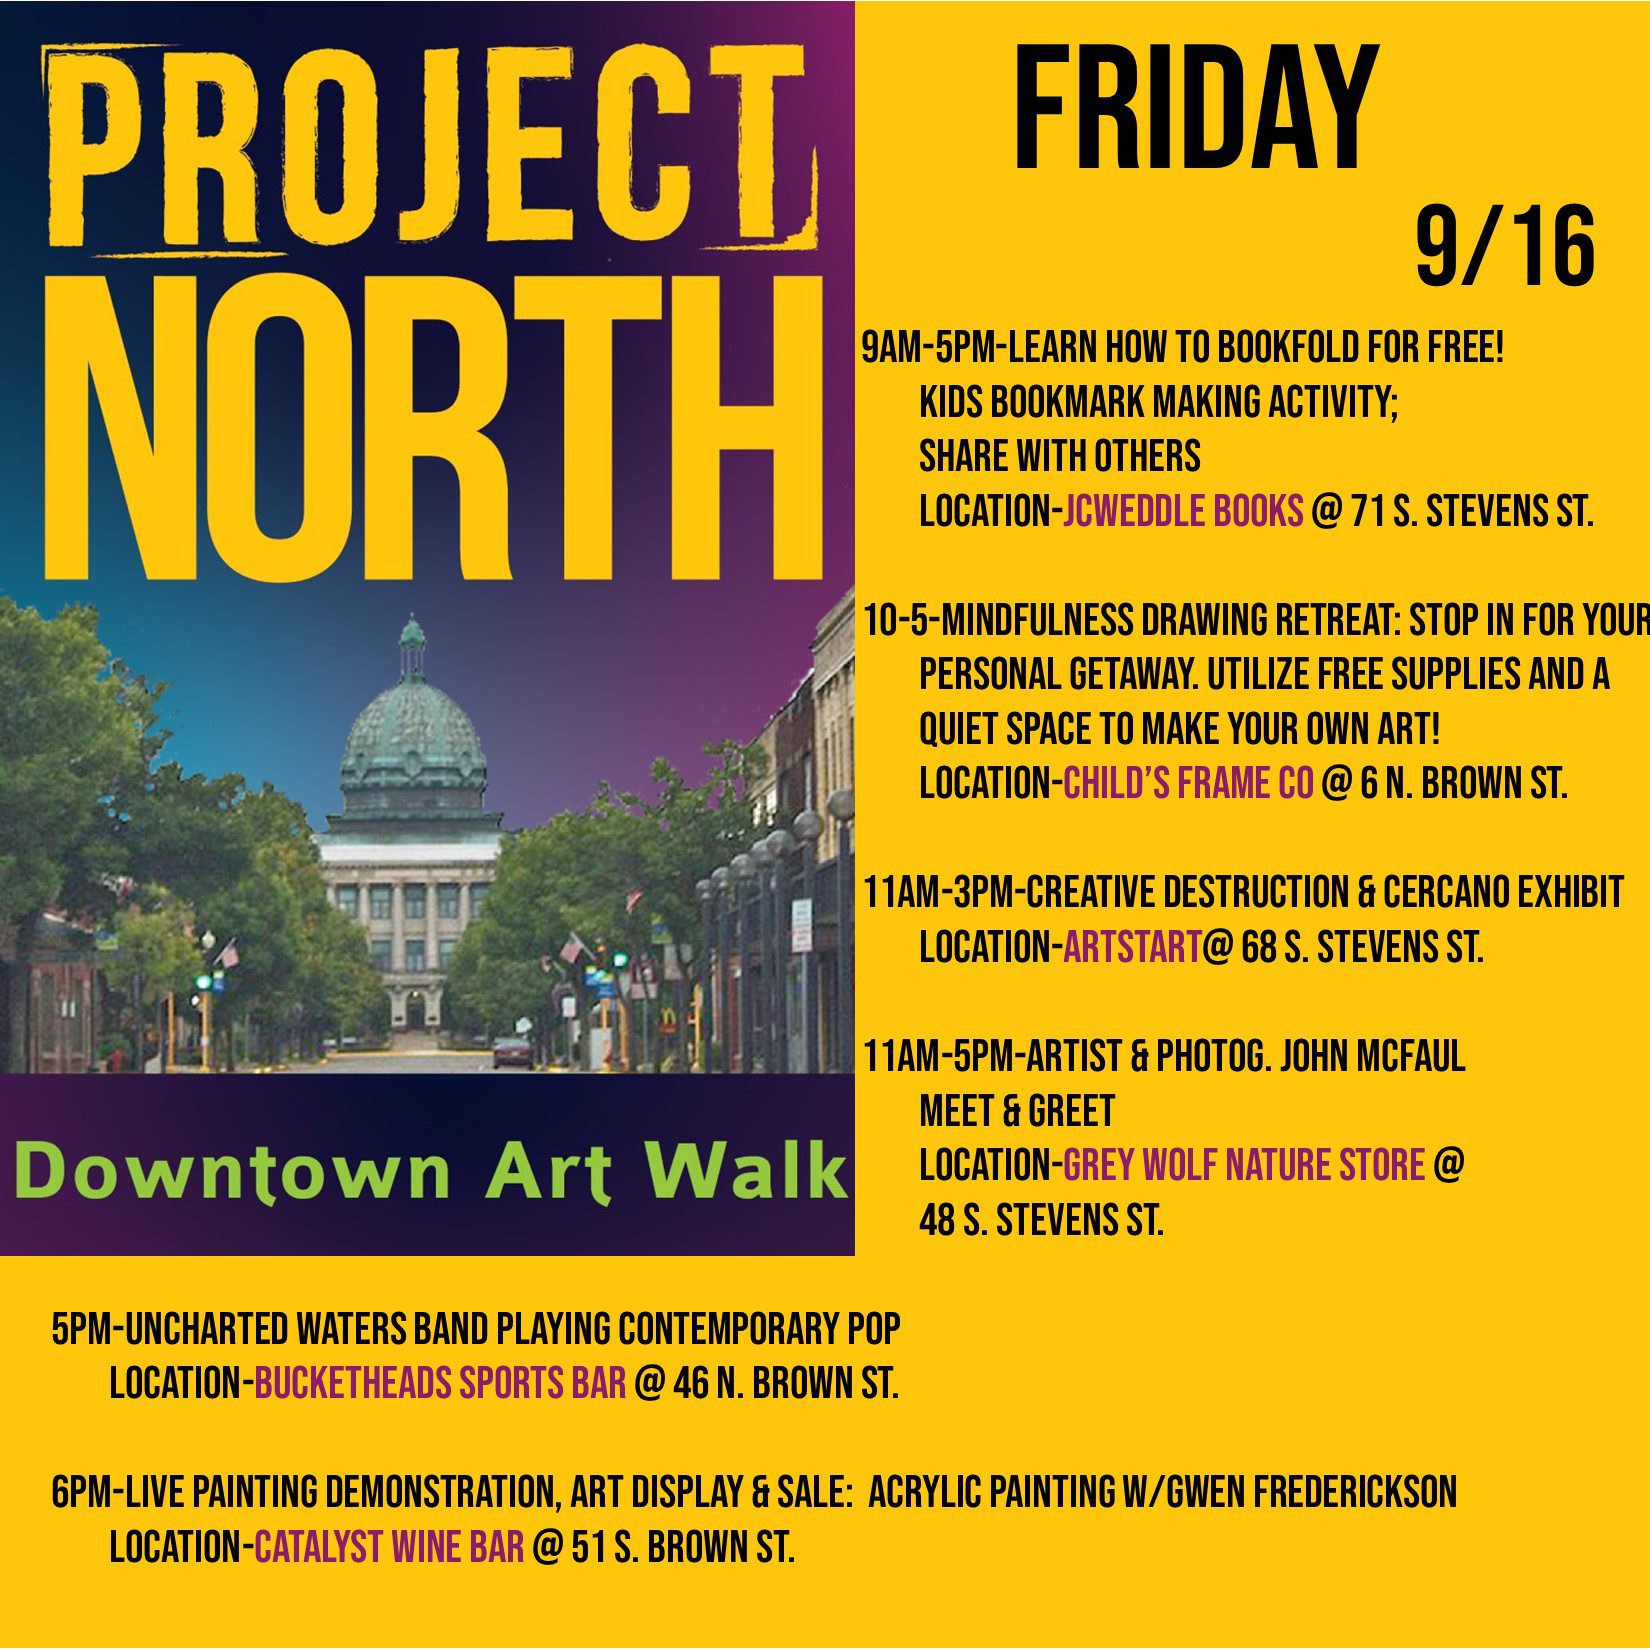 Art Walk Graphic and Times FRIDAY